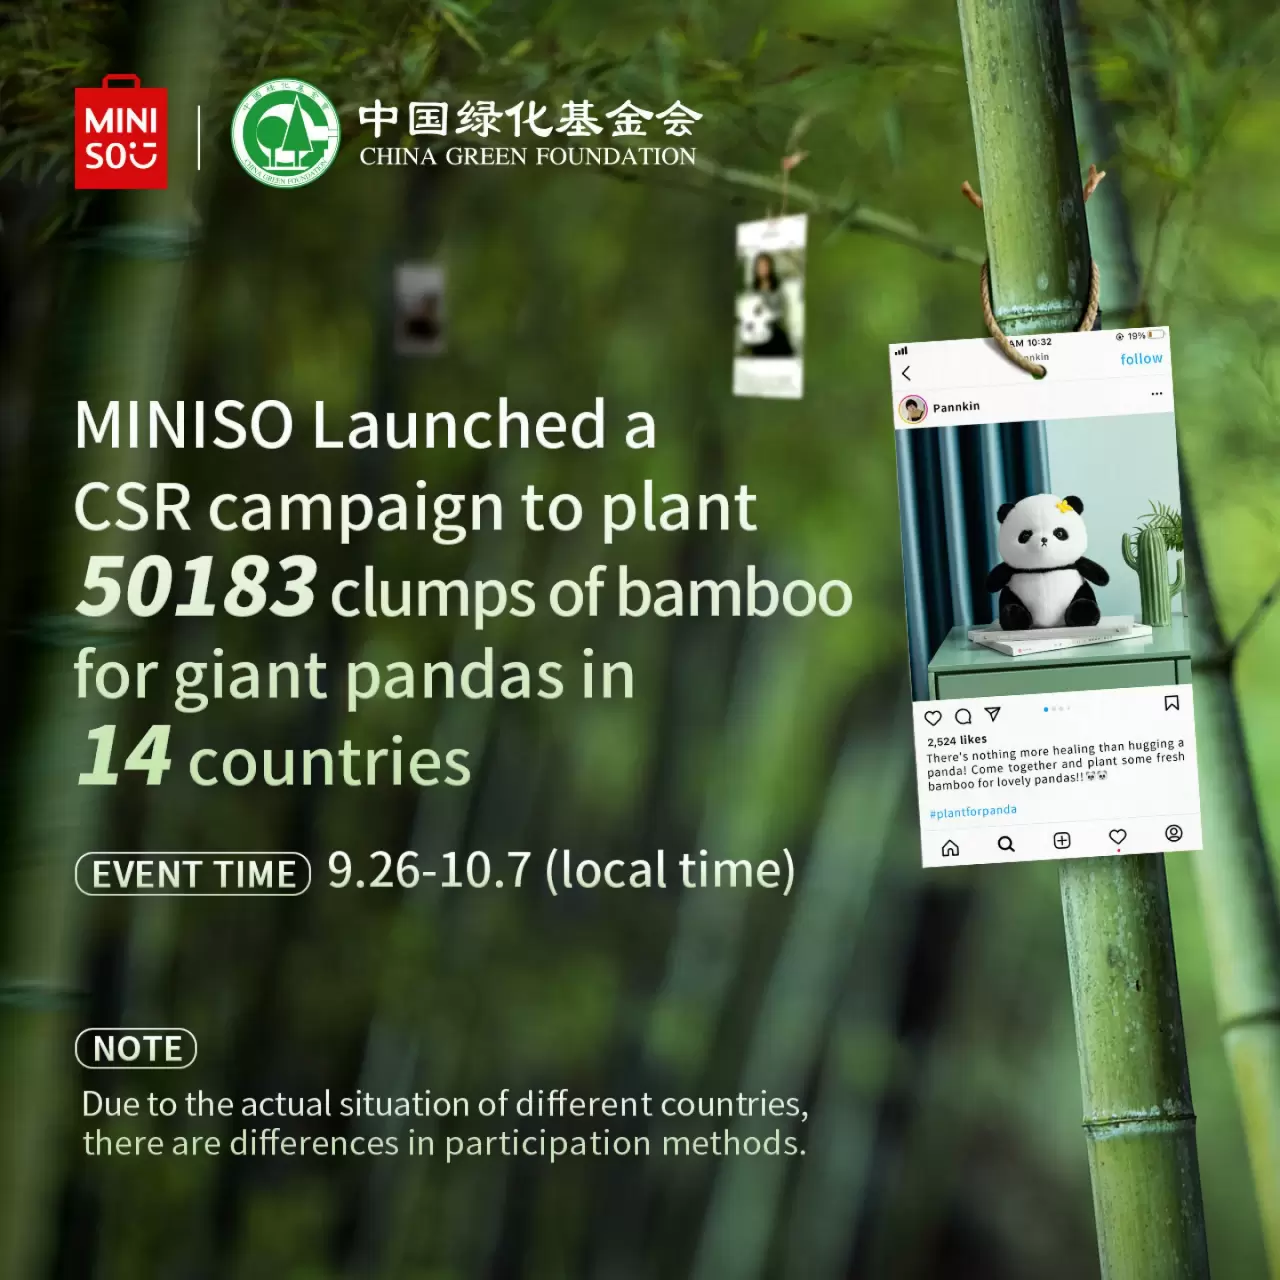 Lifestyle Retailer MINISO to Plant Bamboo Forest in Panda Protection Drive After Successful Global Campaign img#1